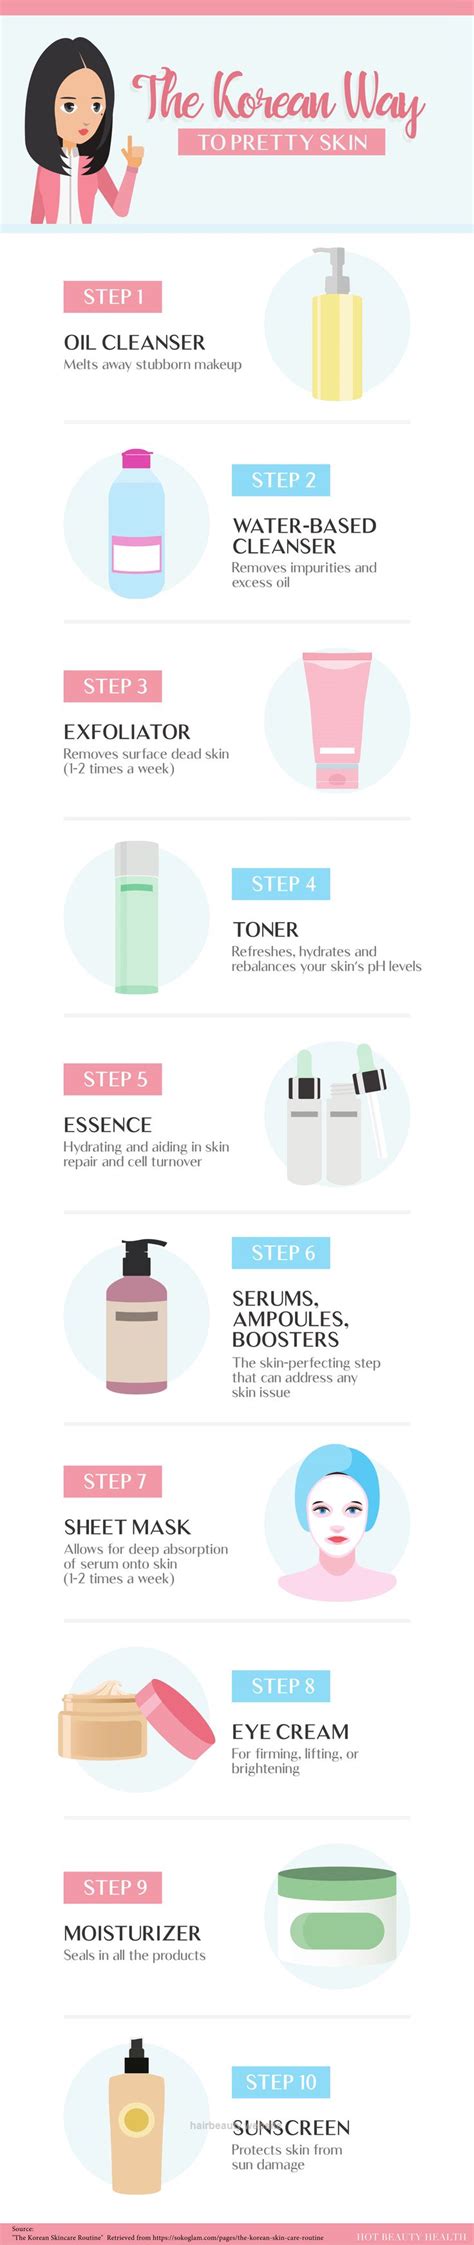 The Ever So Popular 10 Step Korean Skincare Routine Is Easier Than Ever To Do Wi Korean 10